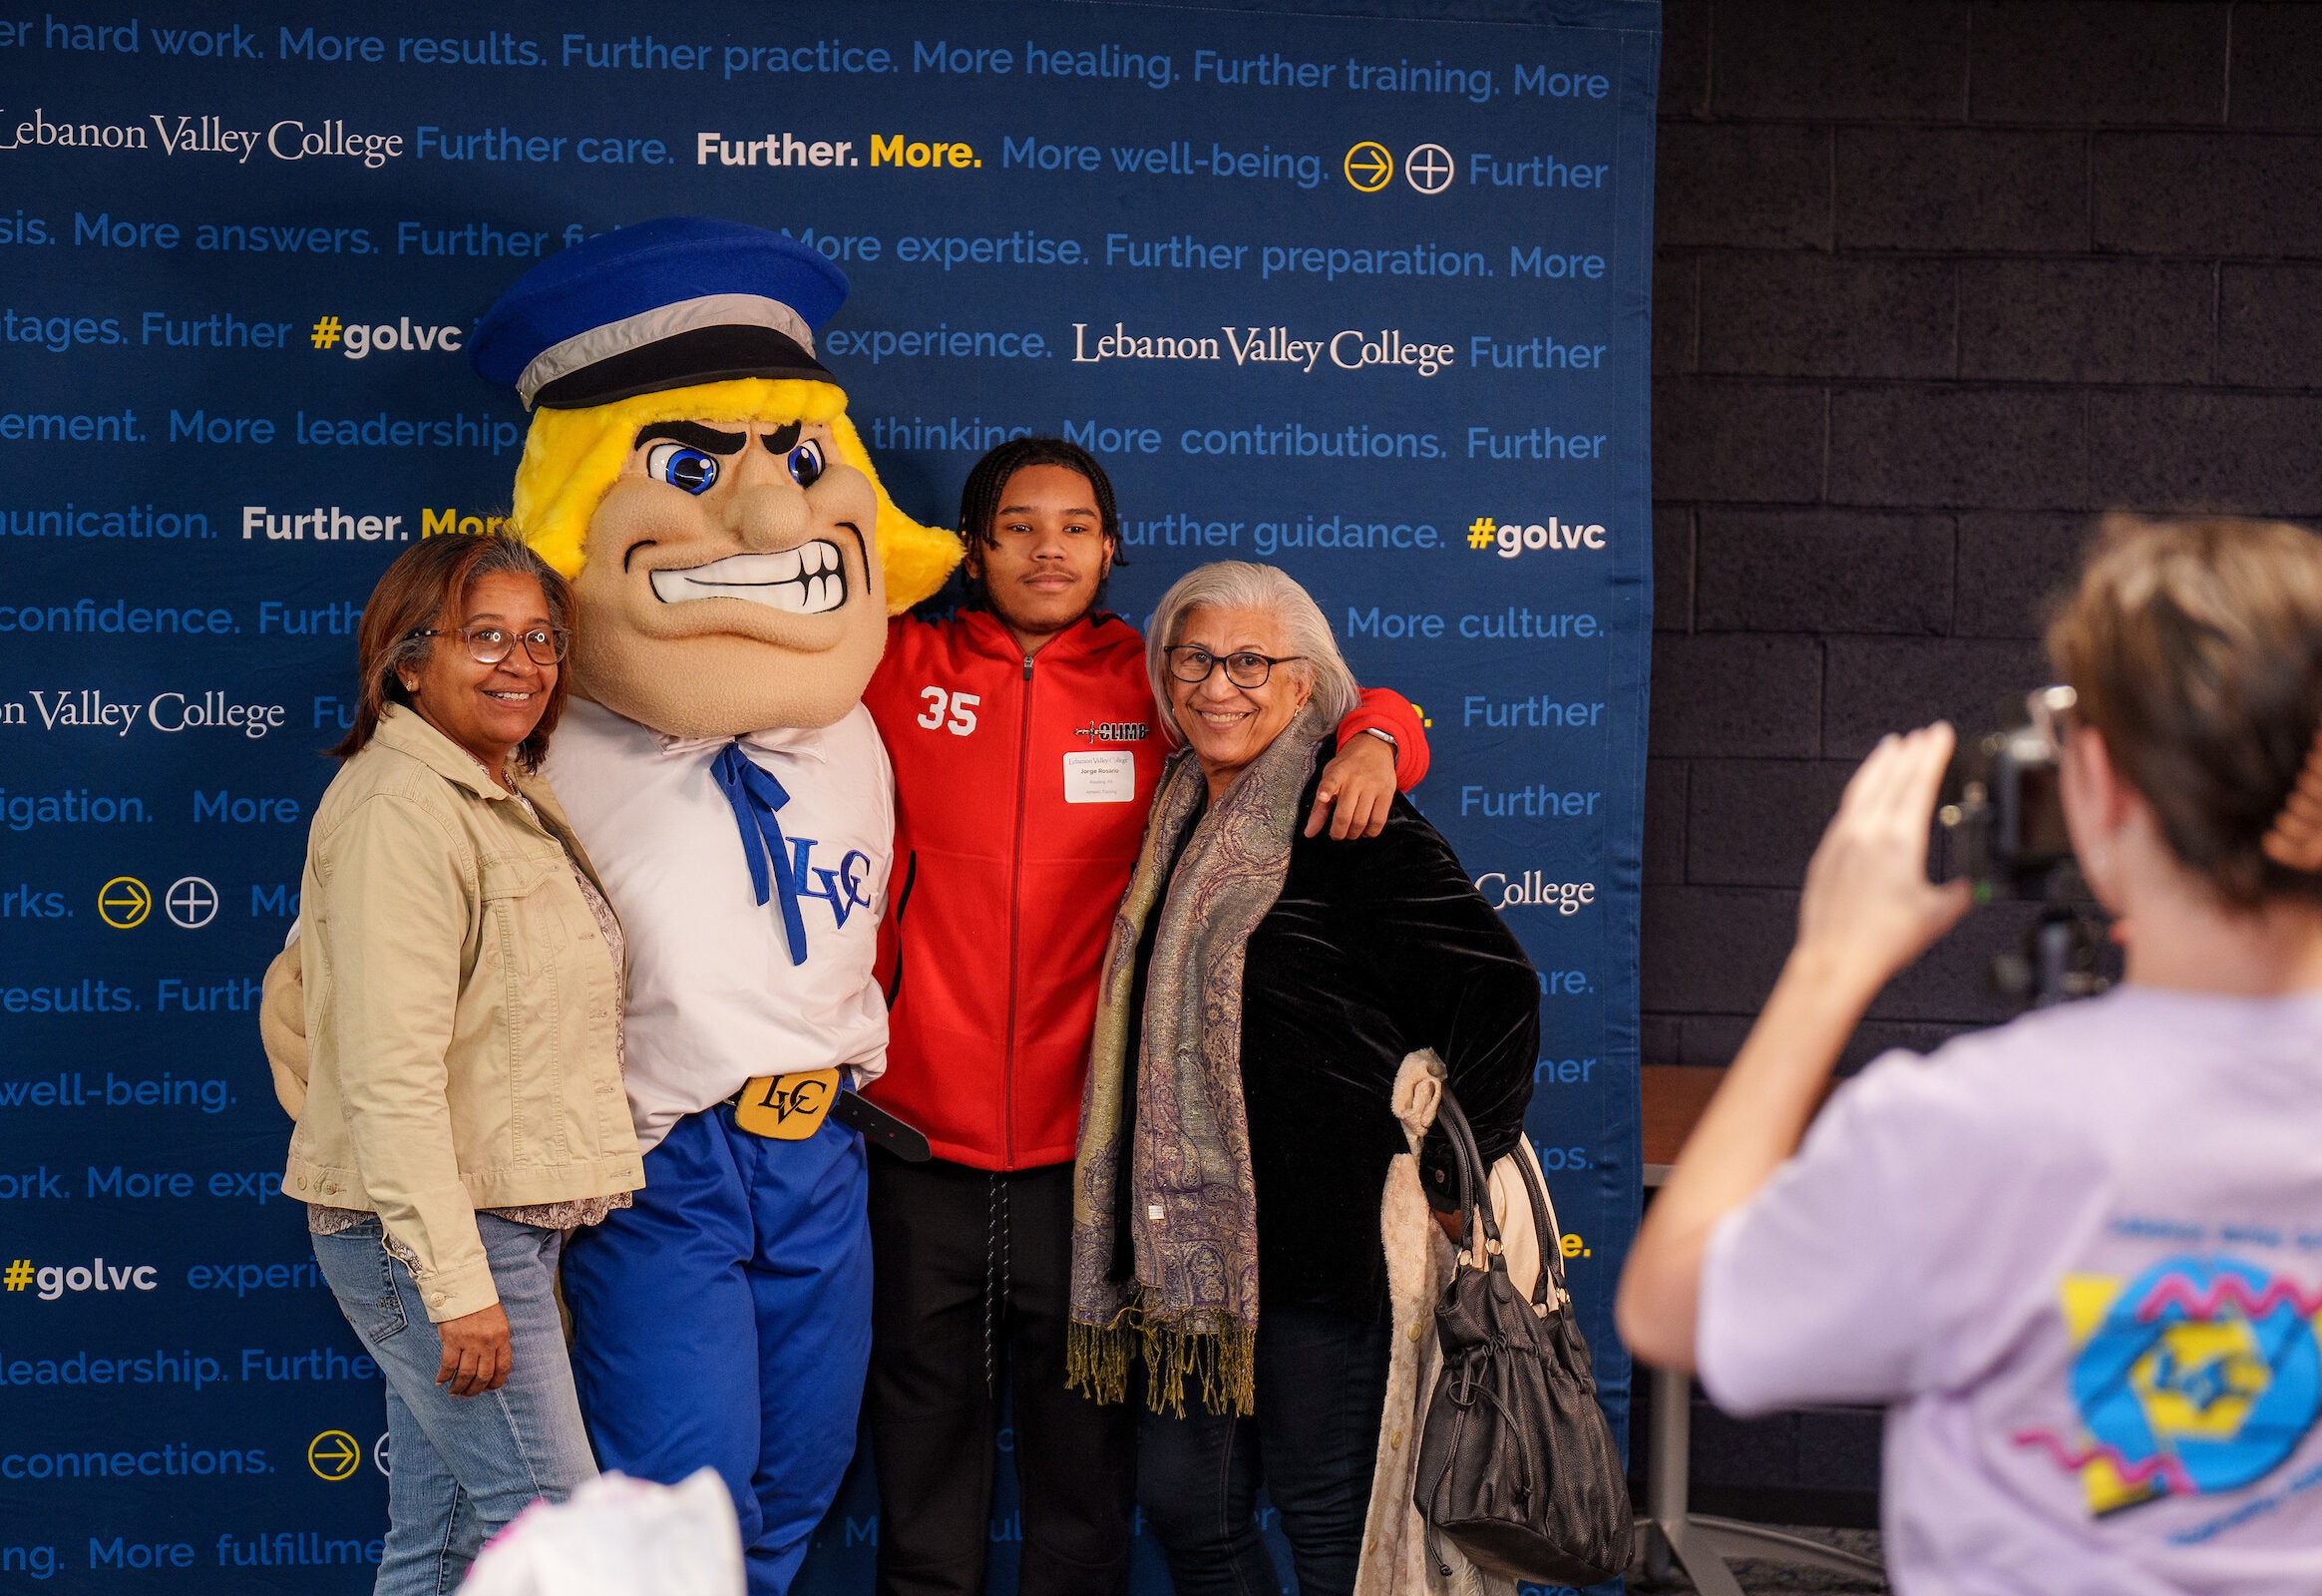 LVC accepted student poses with family and Dutchman mascot during event